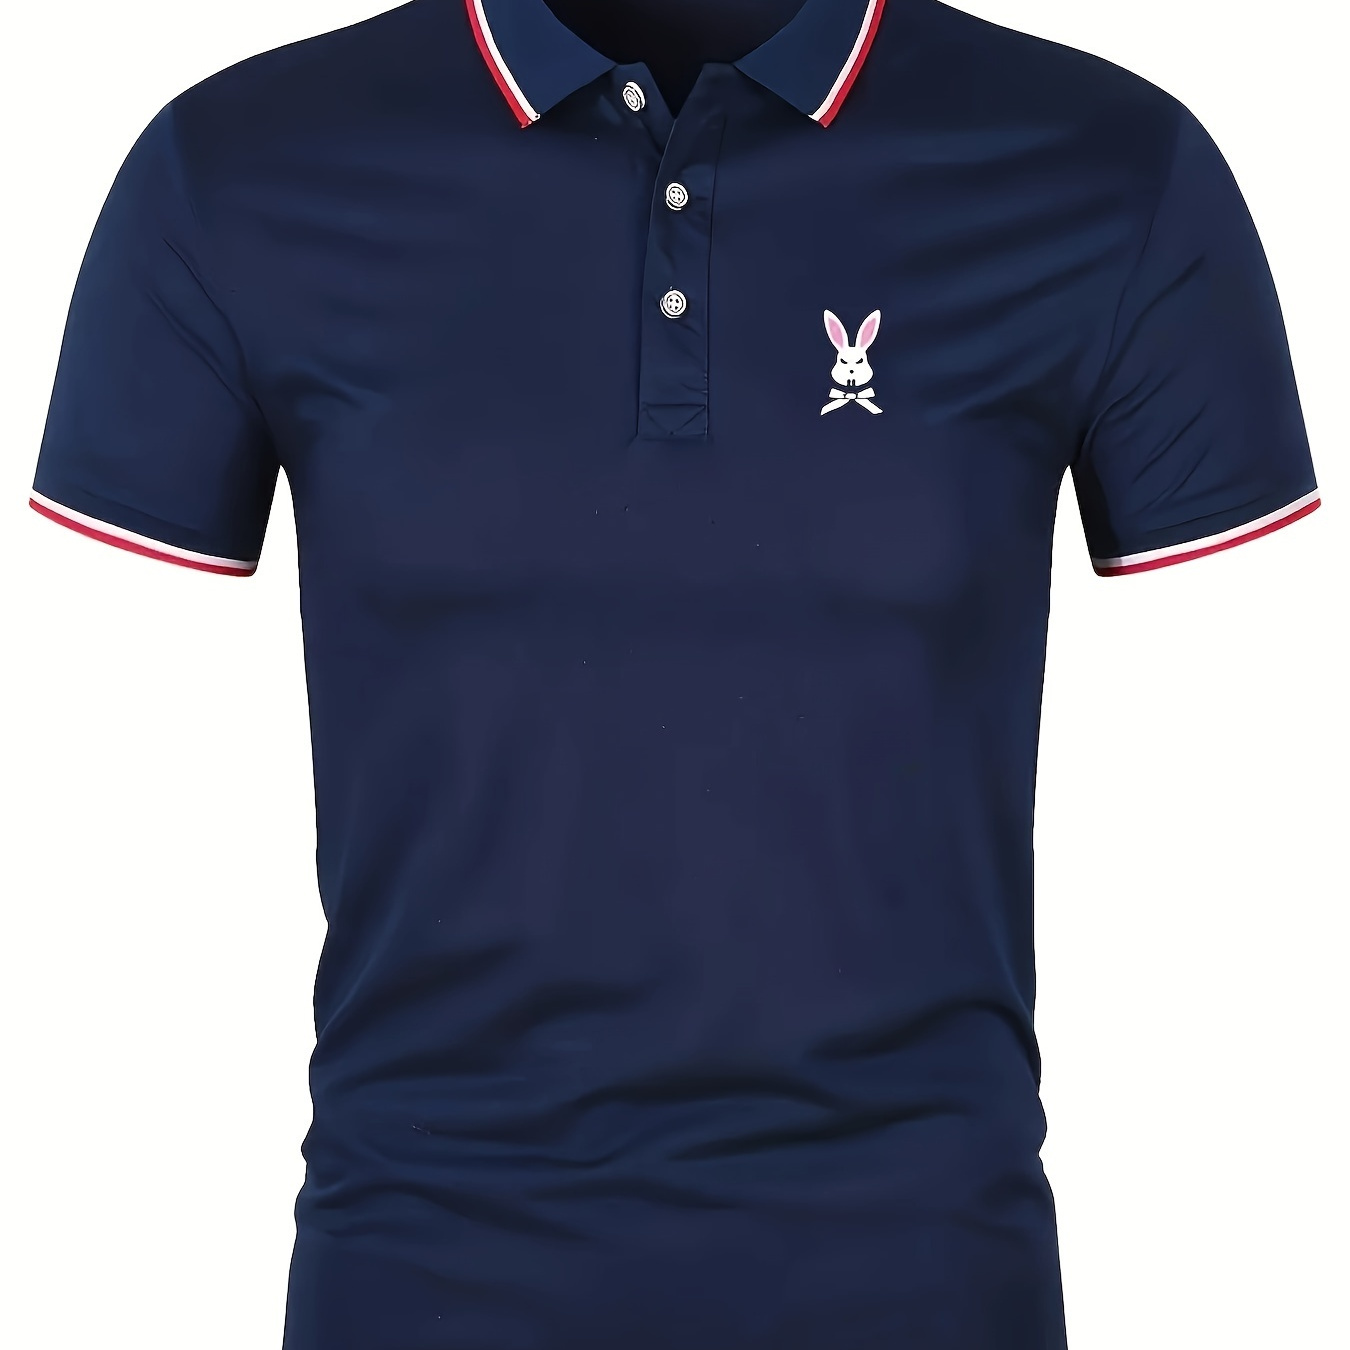 

Rabbit Print Summer Men's Fashionable Lapel Short Sleeve Golf T-shirt, Suitable For Commercial Entertainment Occasions, Such As Tennis And Golf, Men's Clothing, As Gifts